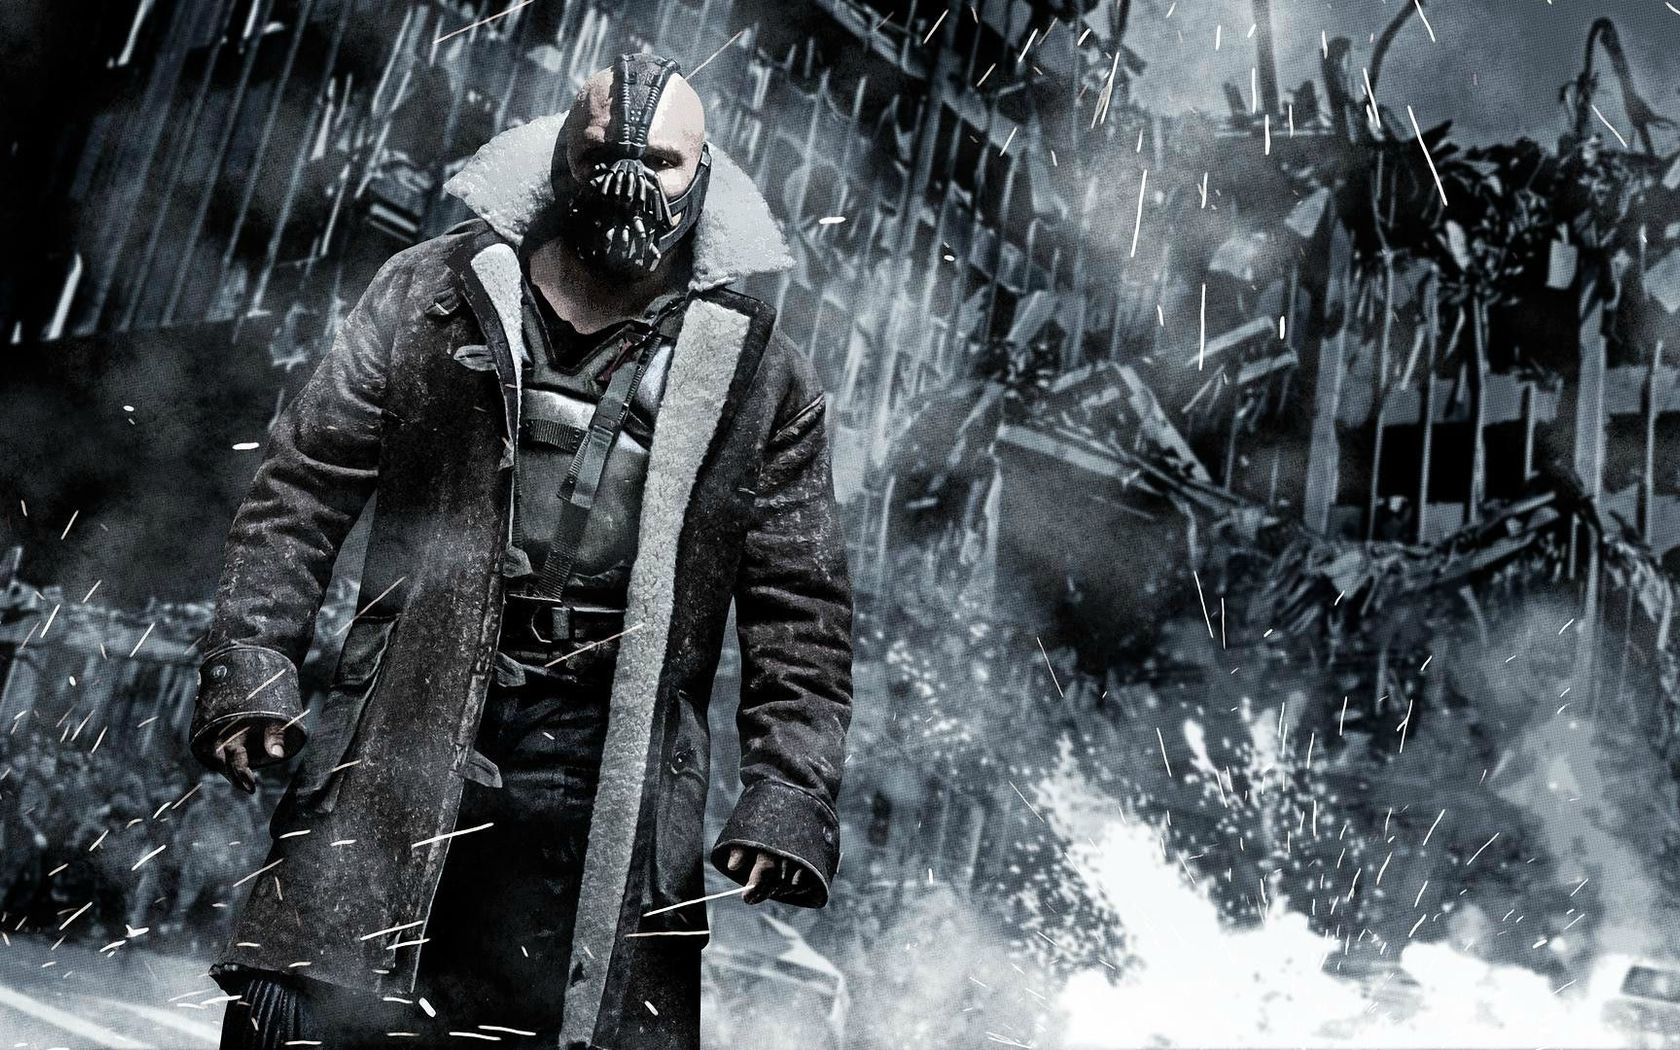 The Dark Knight Rises download the new for android